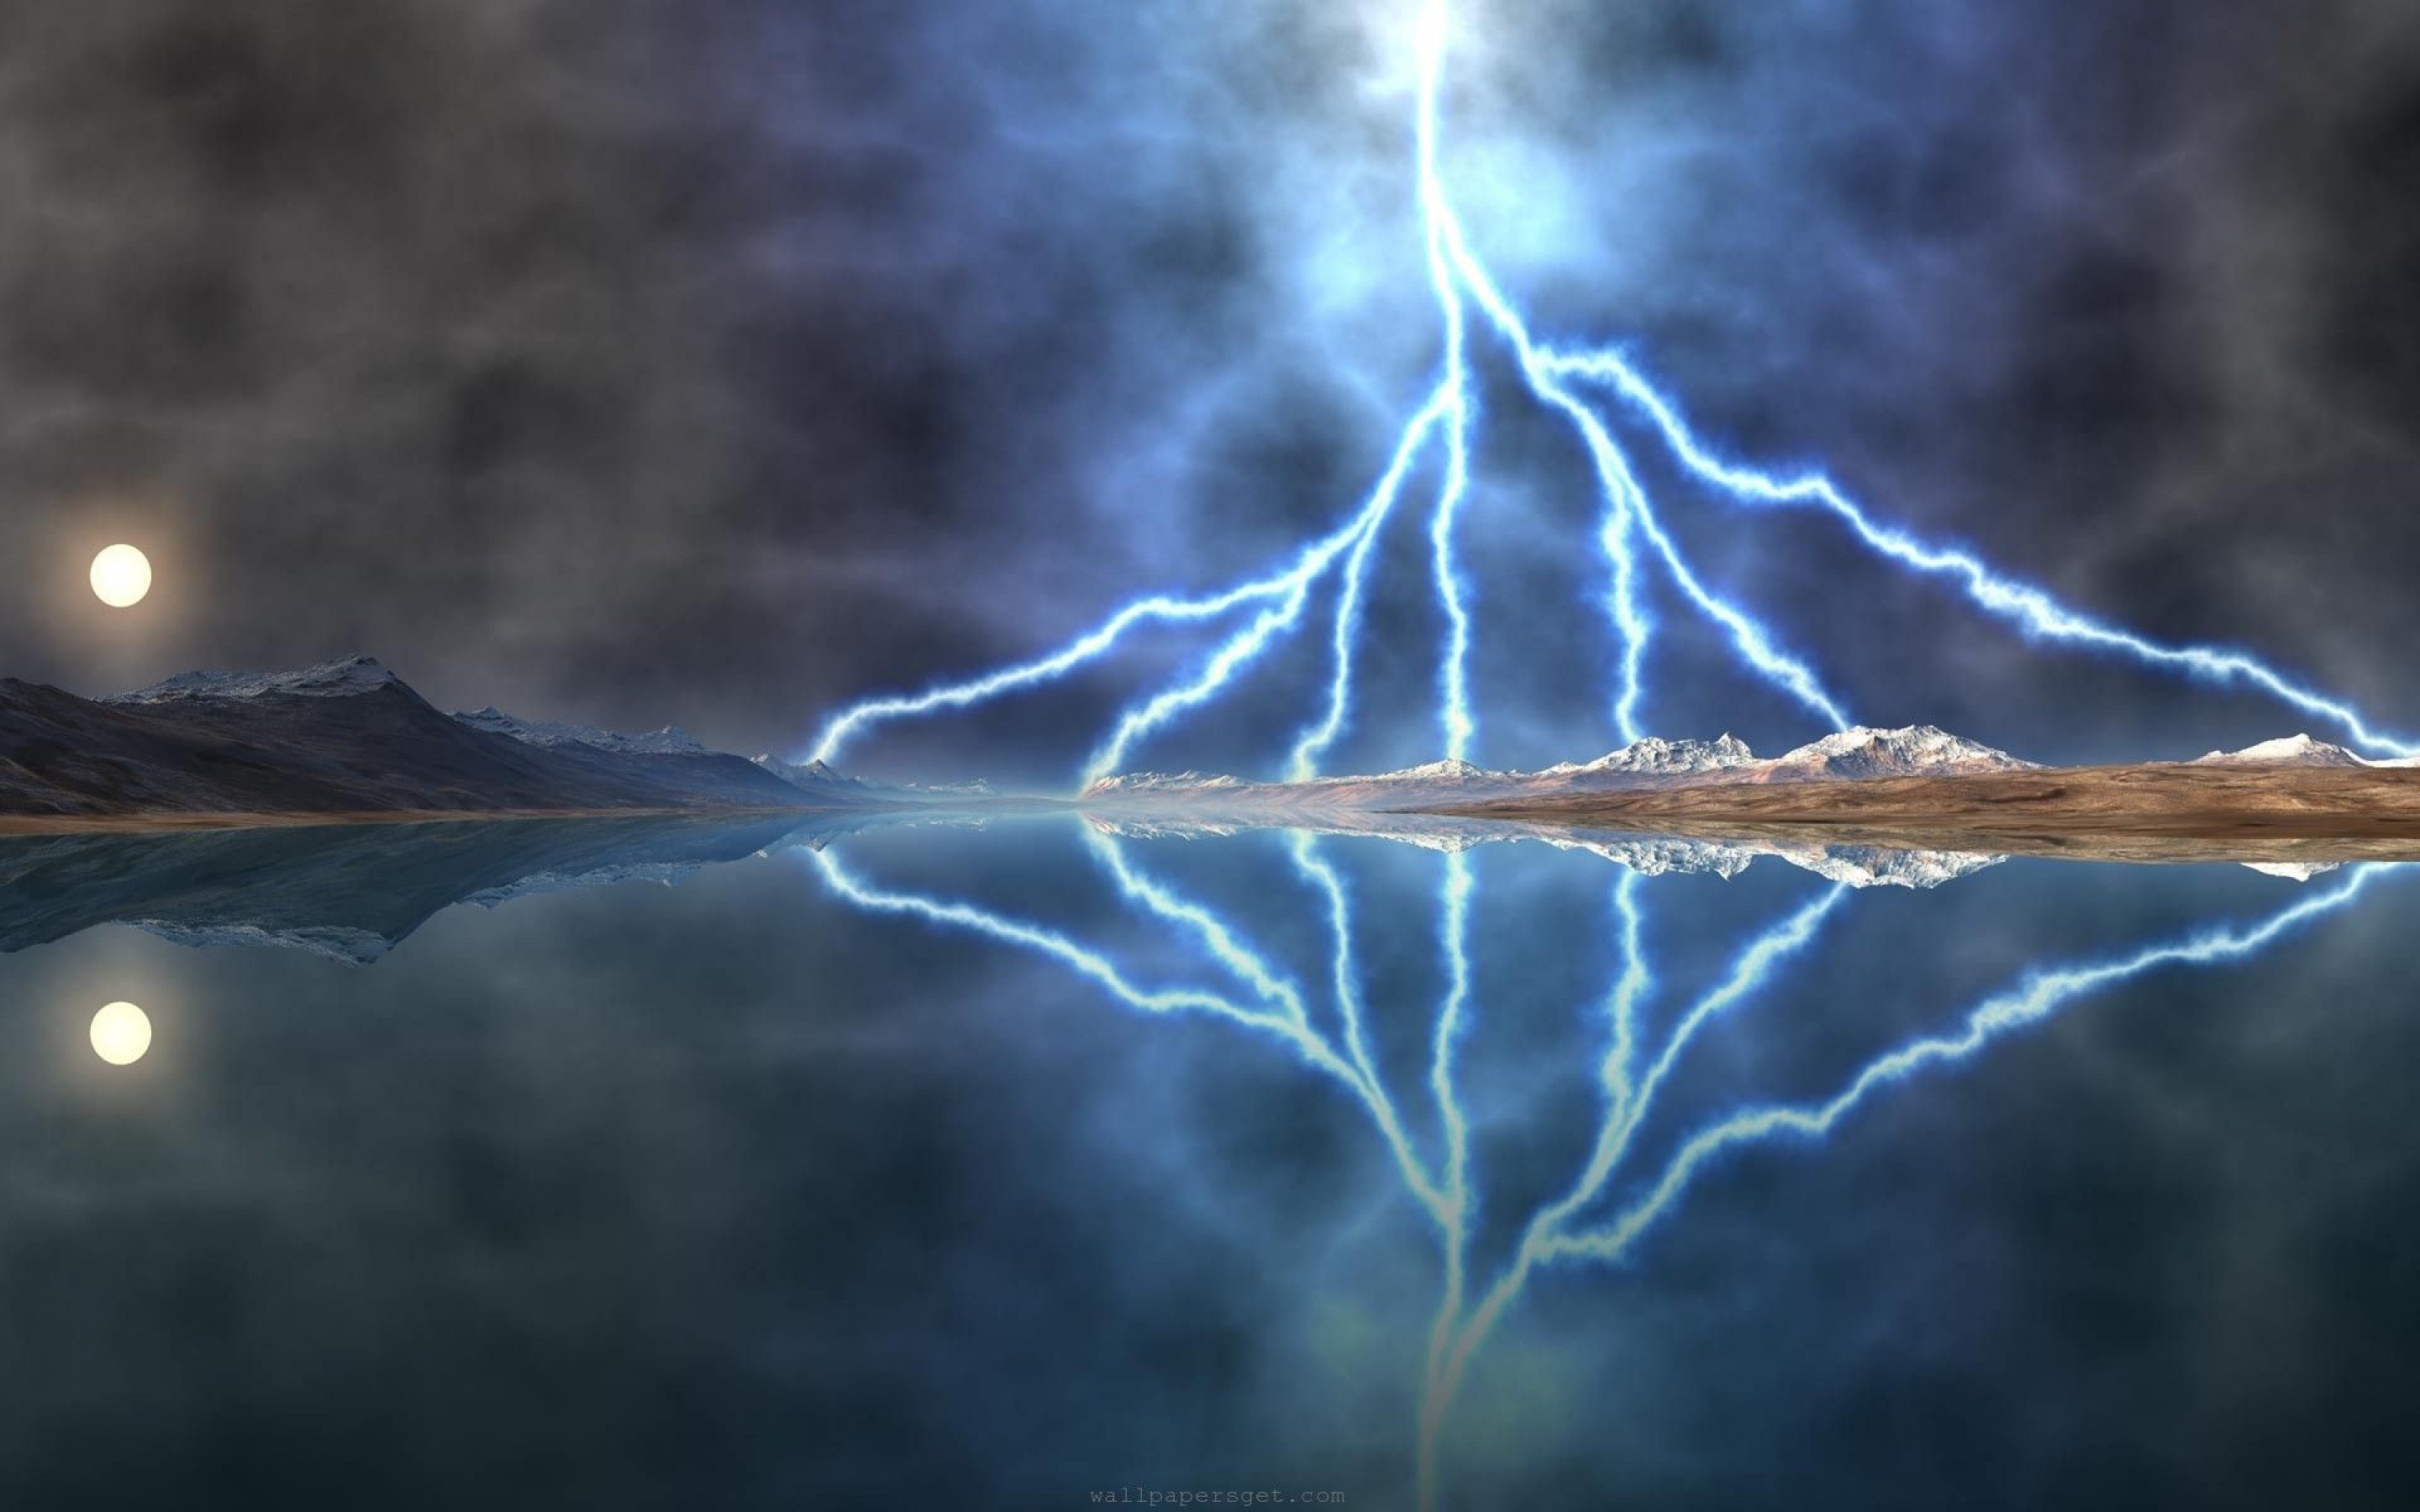 storm, Weather, Rain, Sky, Clouds, Nature, Lightning, Reflection, Mountains Wallpaper